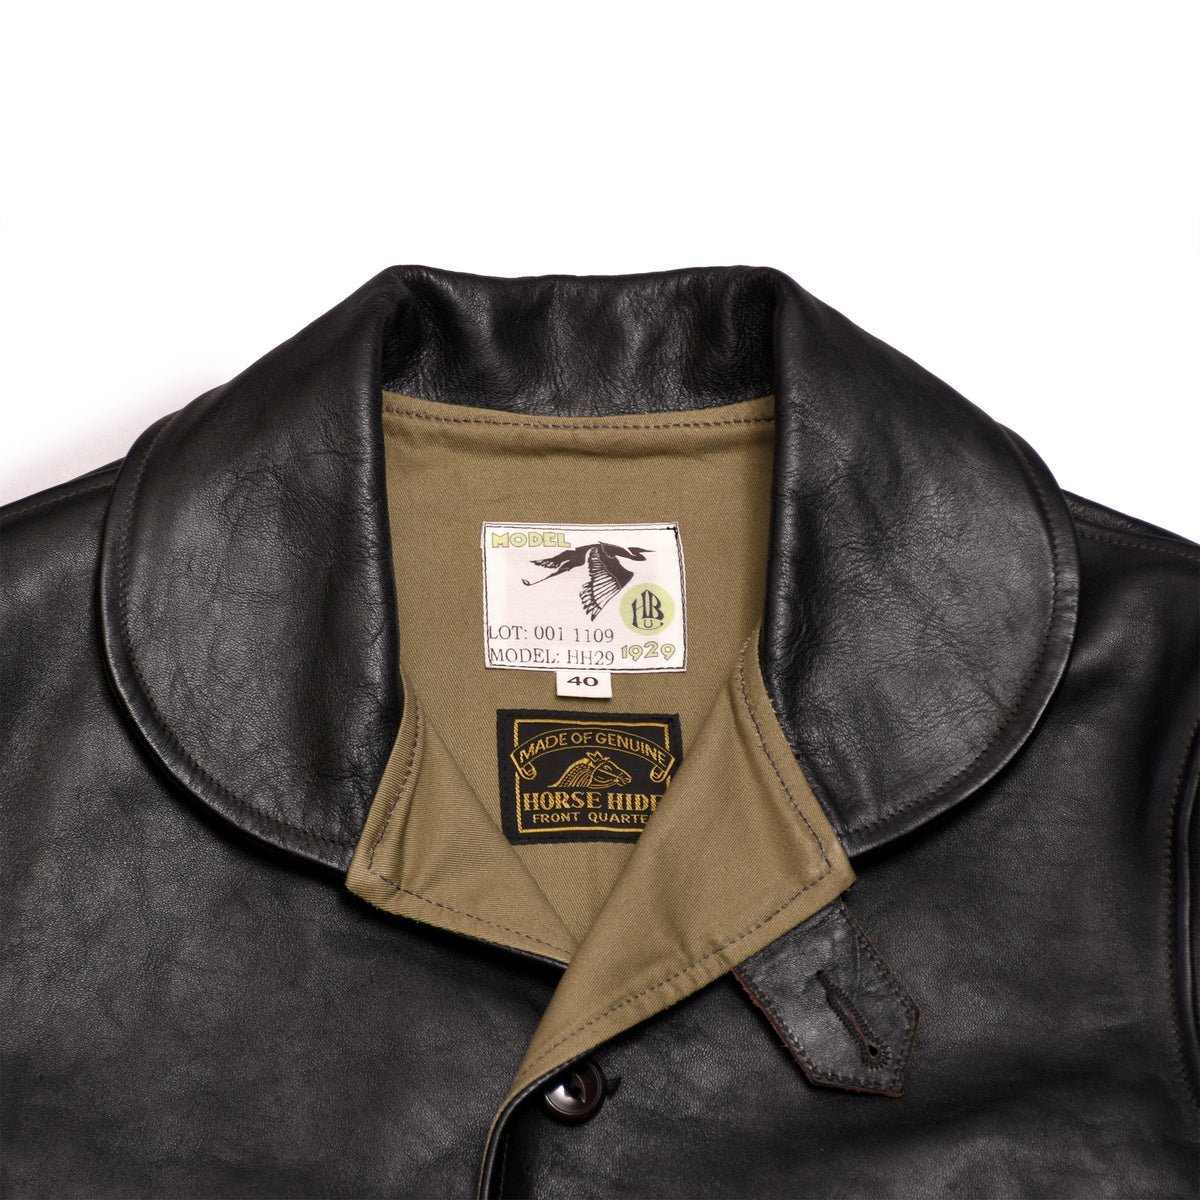 The Himel Bros. Heron—The Absolute Best A-1 Jacket - Himel Bros. Leather